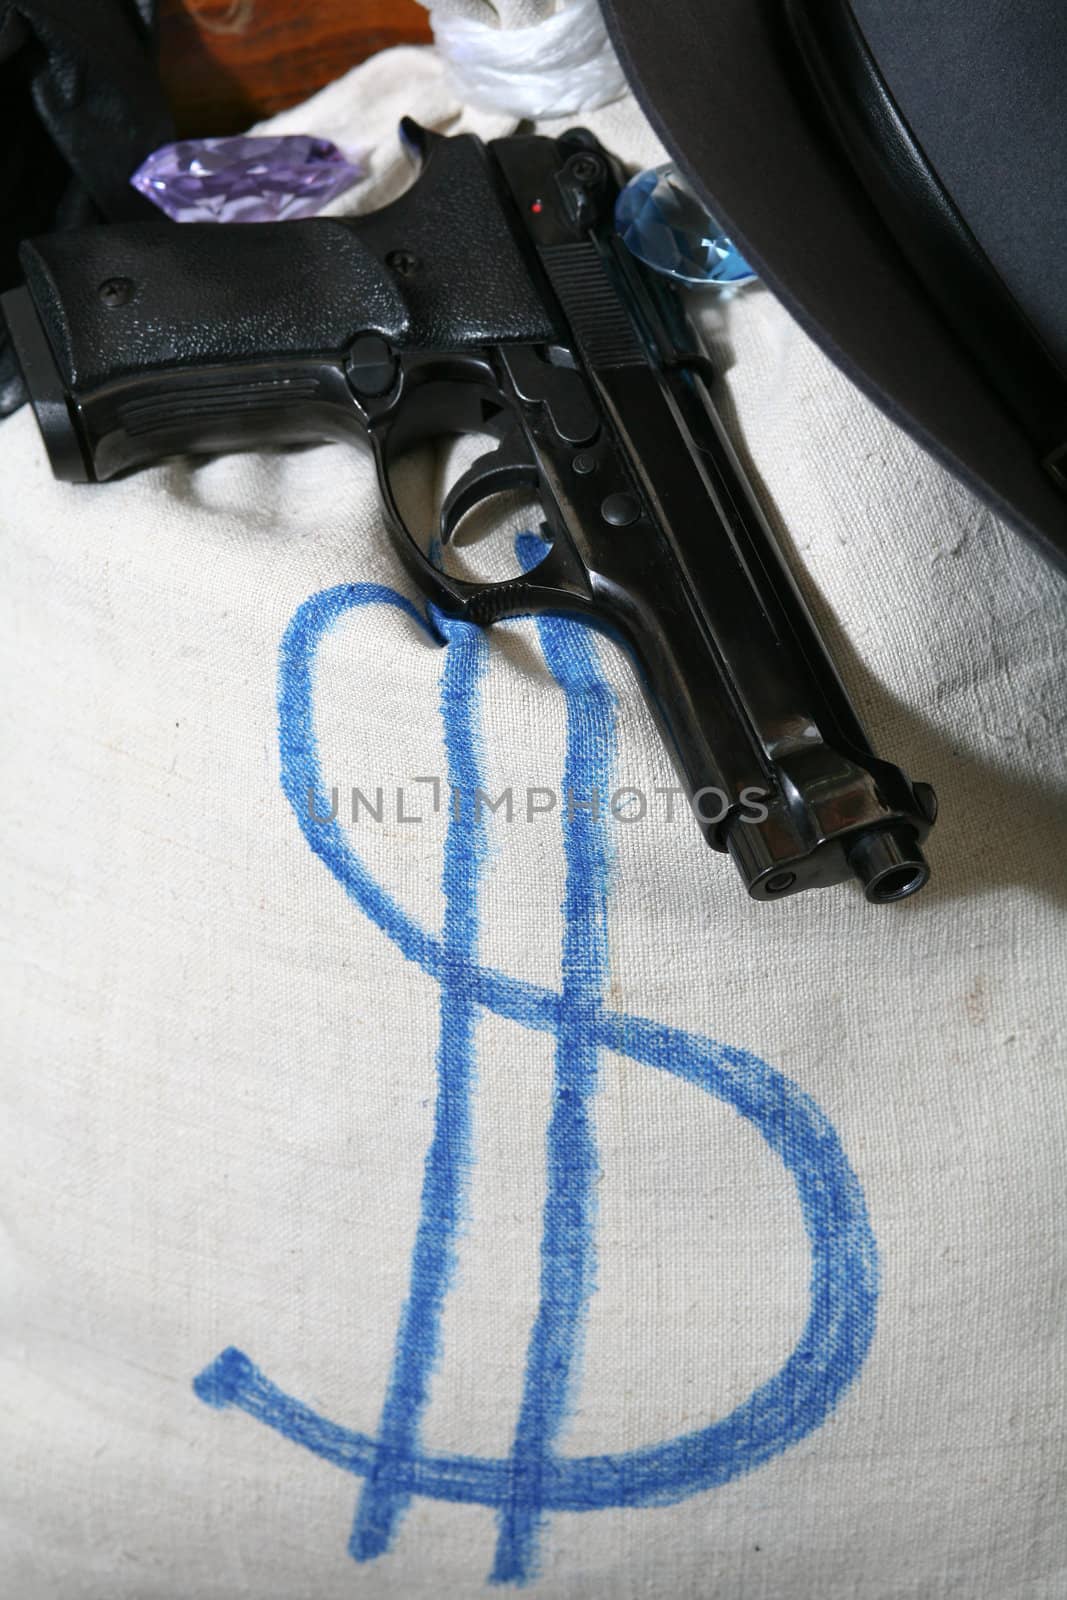 An image of a gun and a bag on a chair